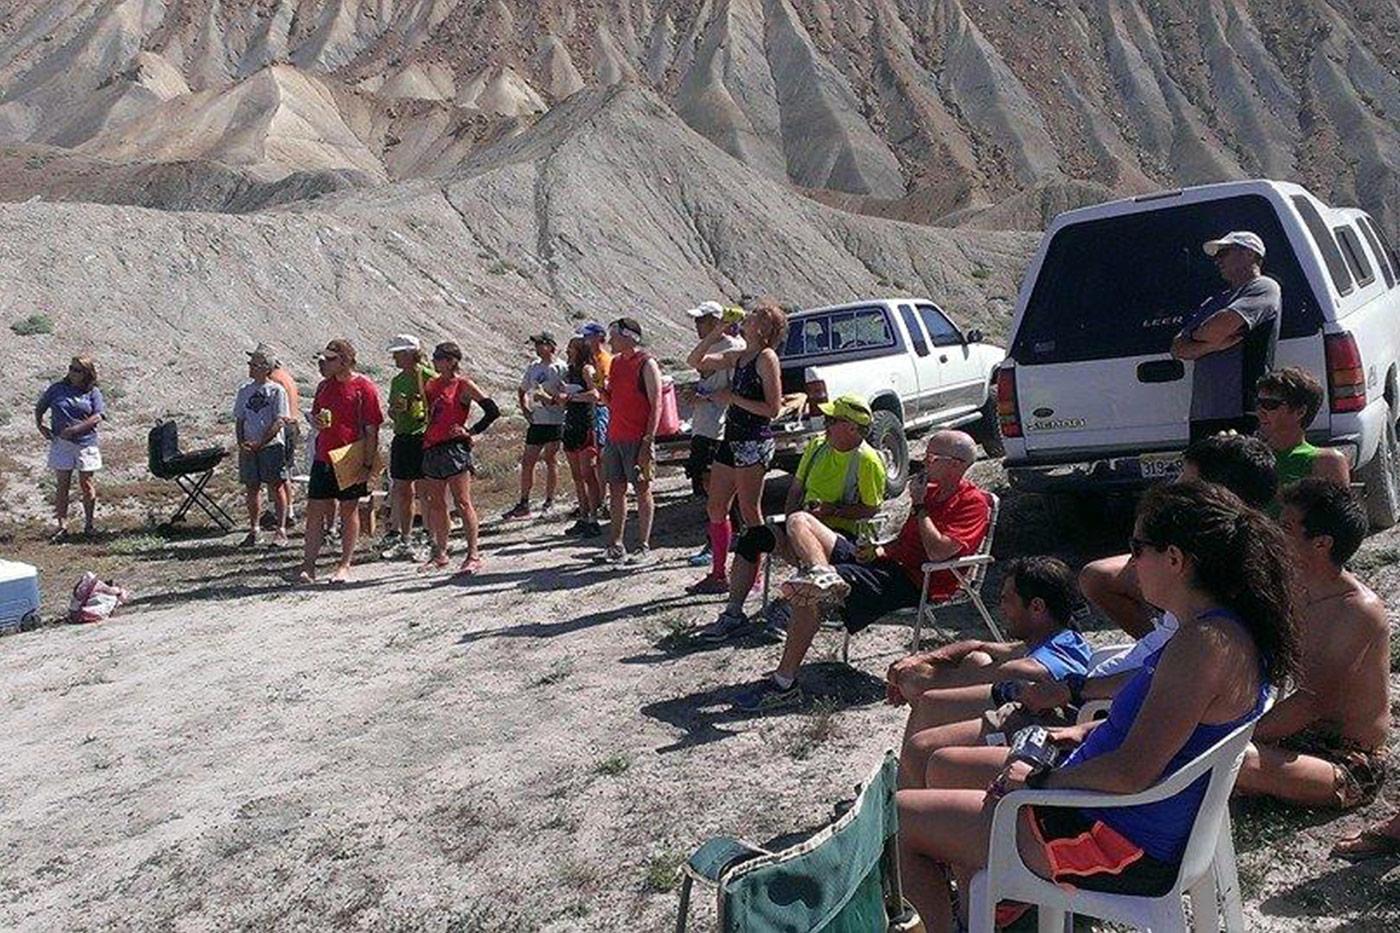 Runners socializing after a Garfield Grumble trail race in Palisade, Colorado 